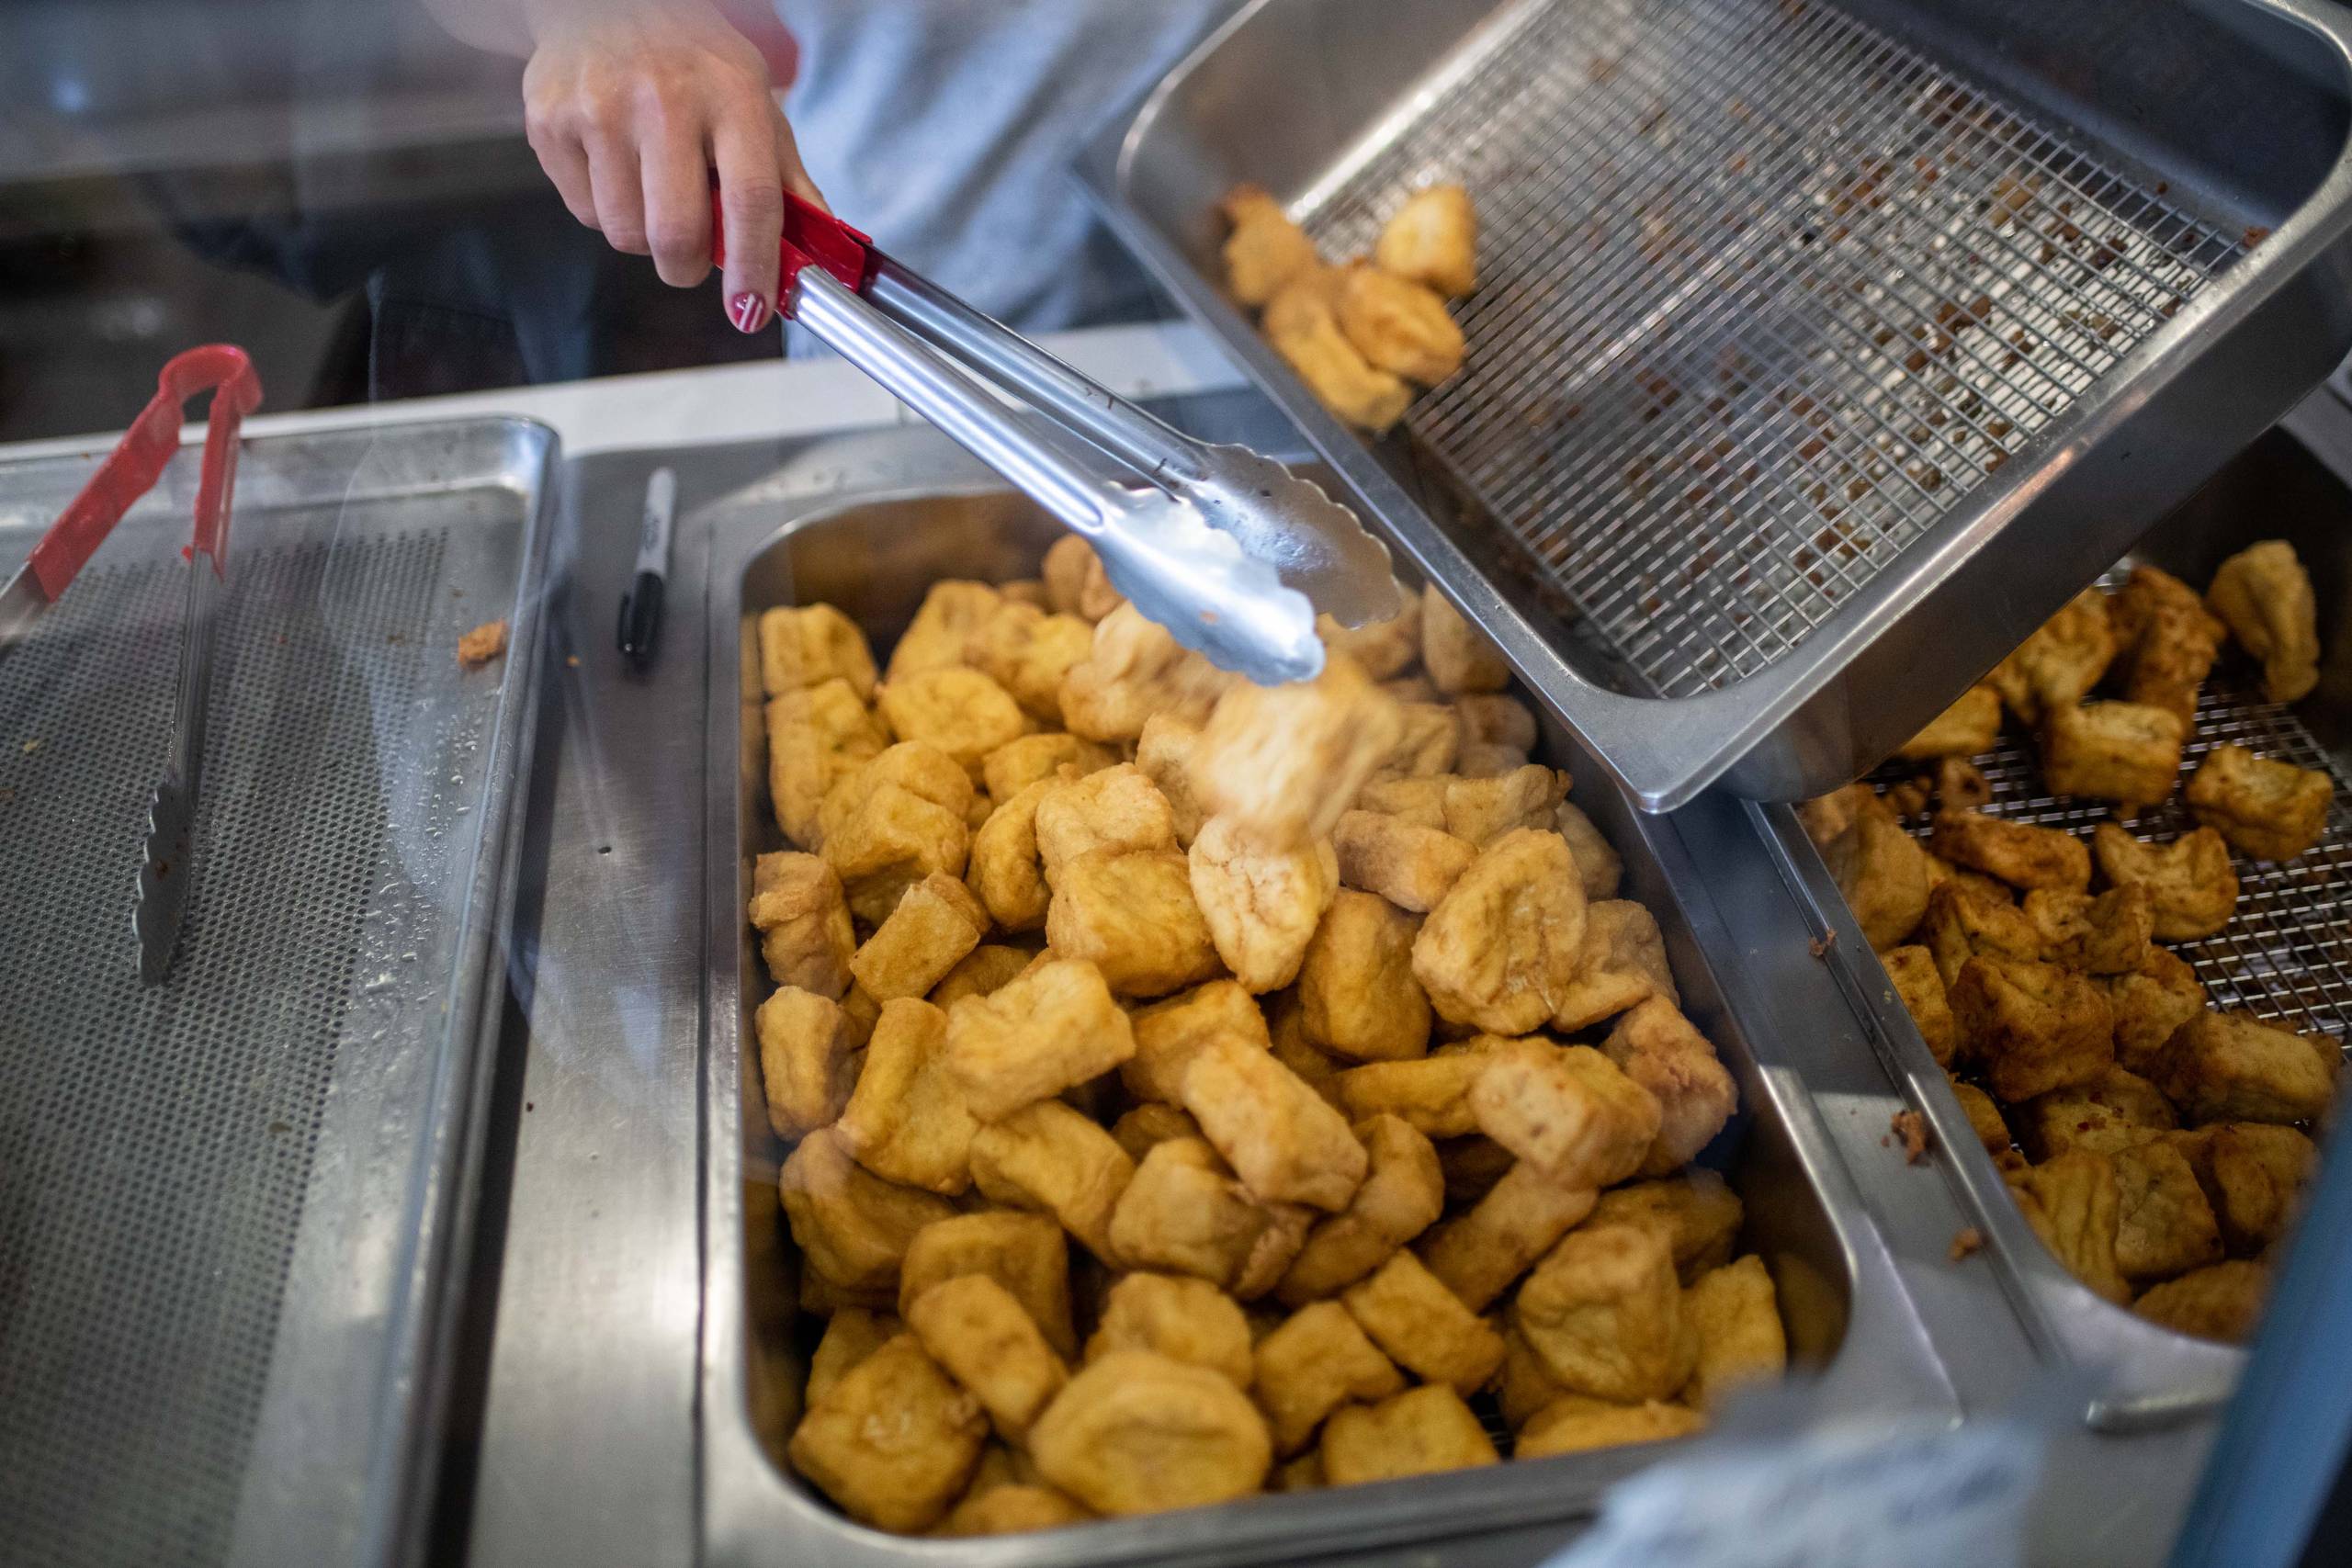 An employee refills a metal display case with freshly fried tofu.